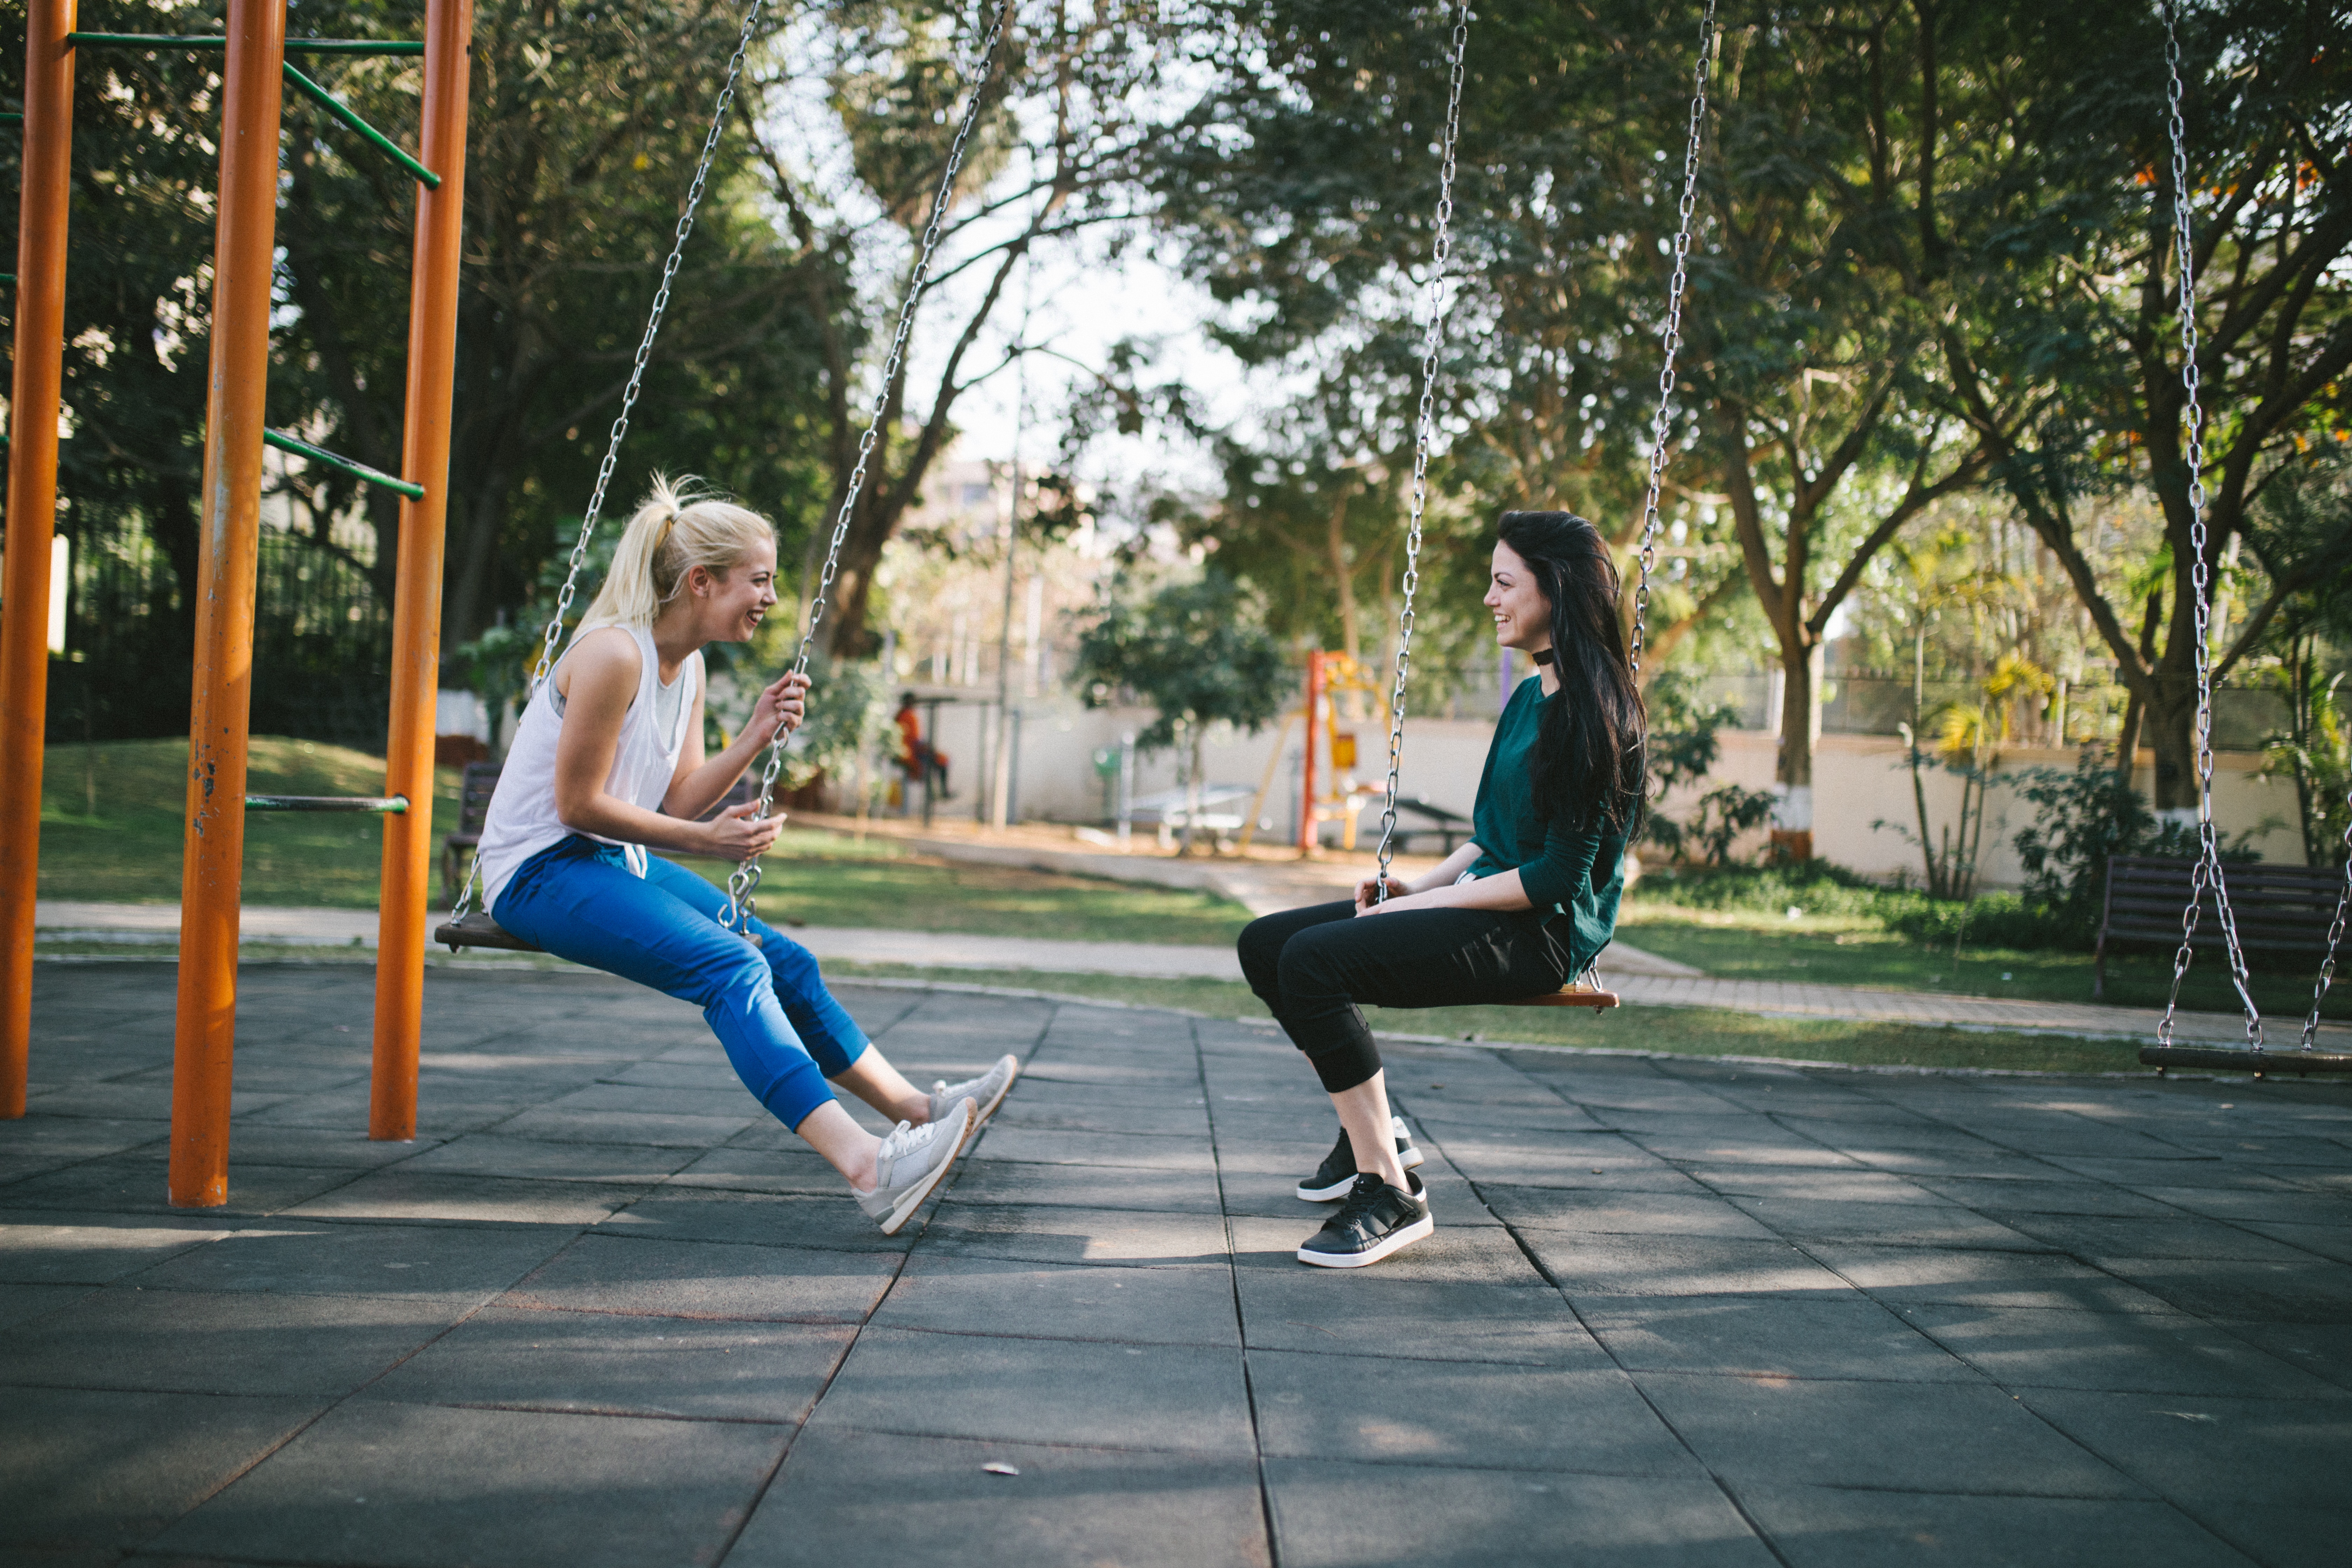 Two women on swings having a conversation while tackling social anxiety.